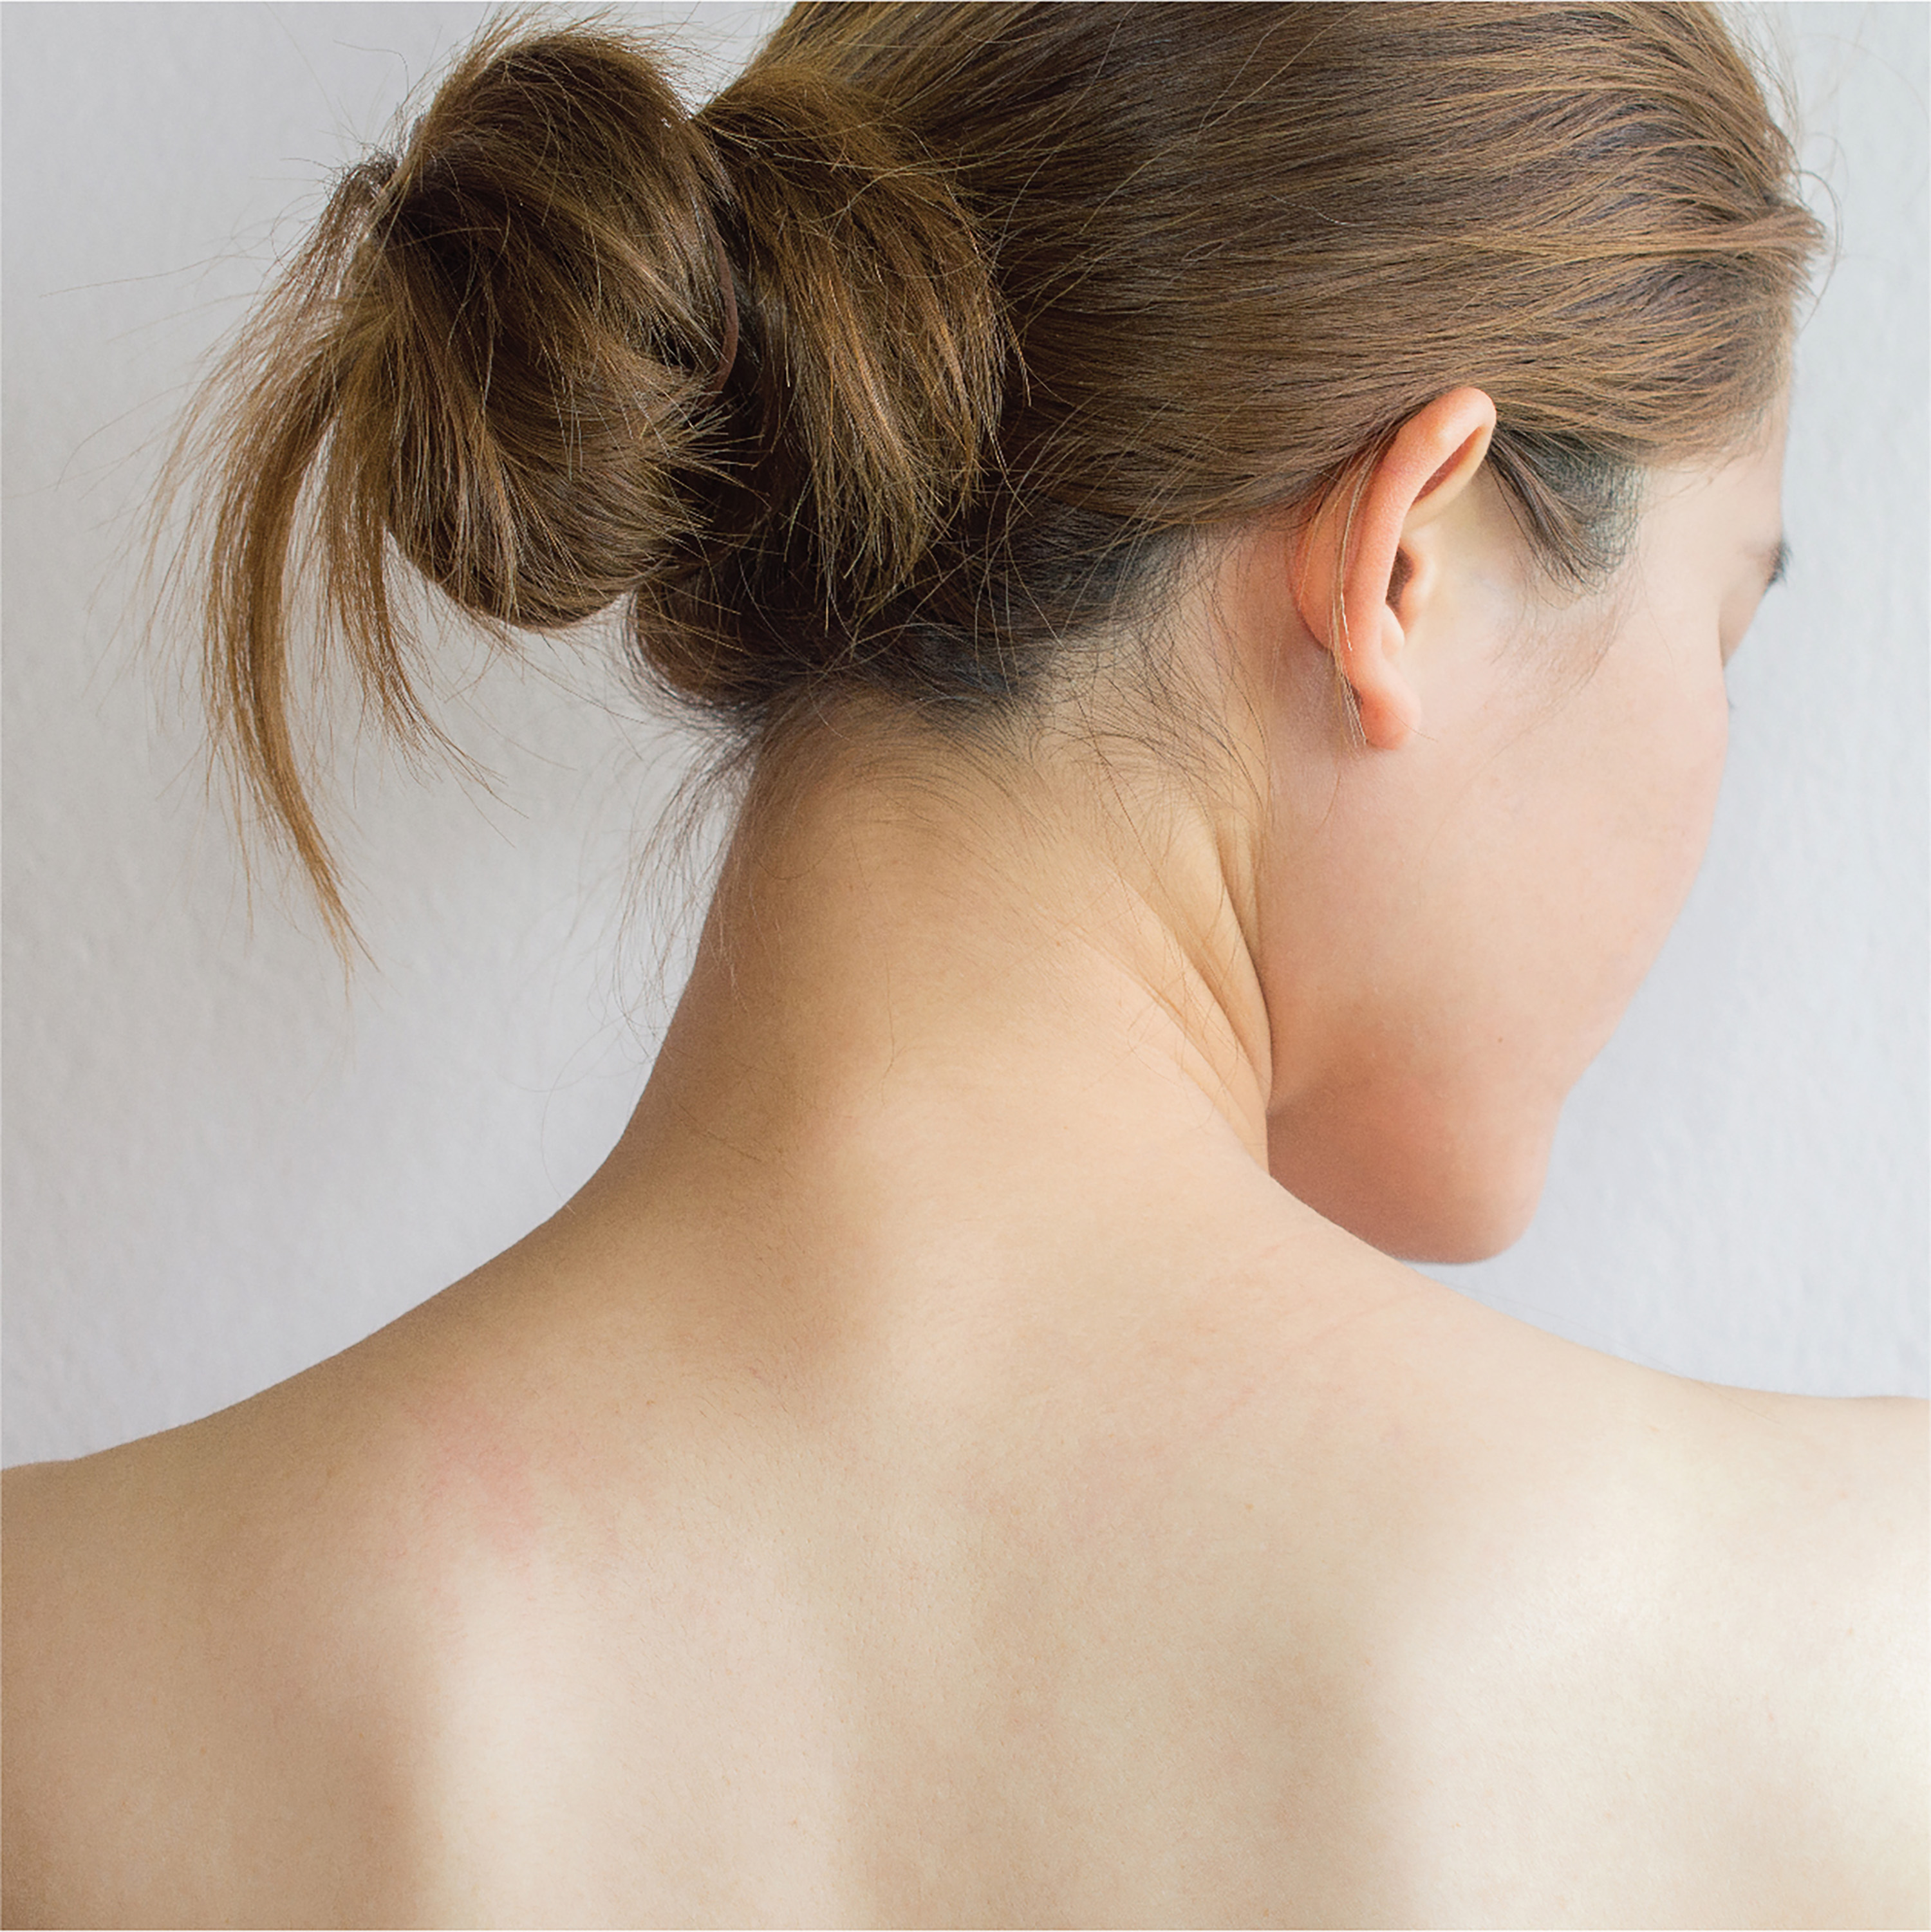 tips-on-how-to-get-rid-of-back-and-chest-acne-olay